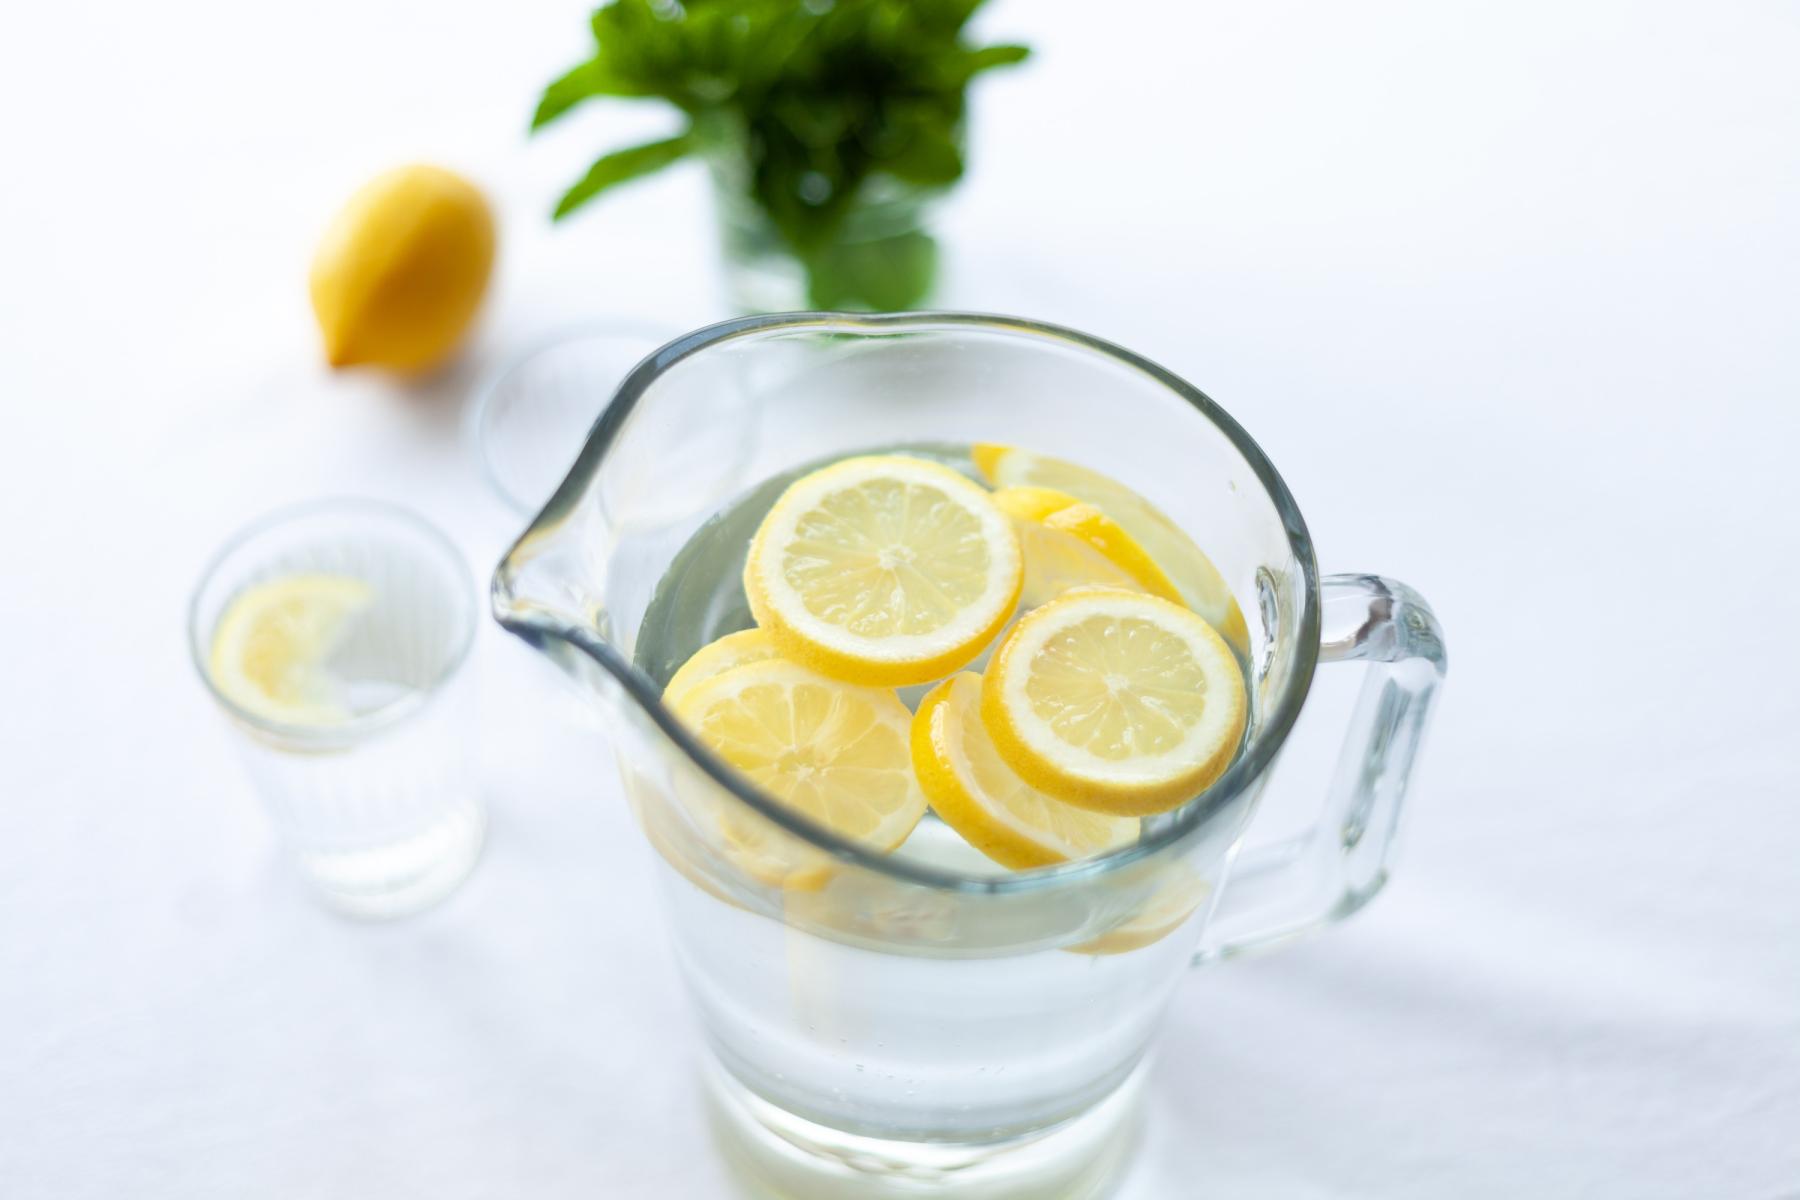 A pitcher of water in a glass jug with lemon slices floating on top